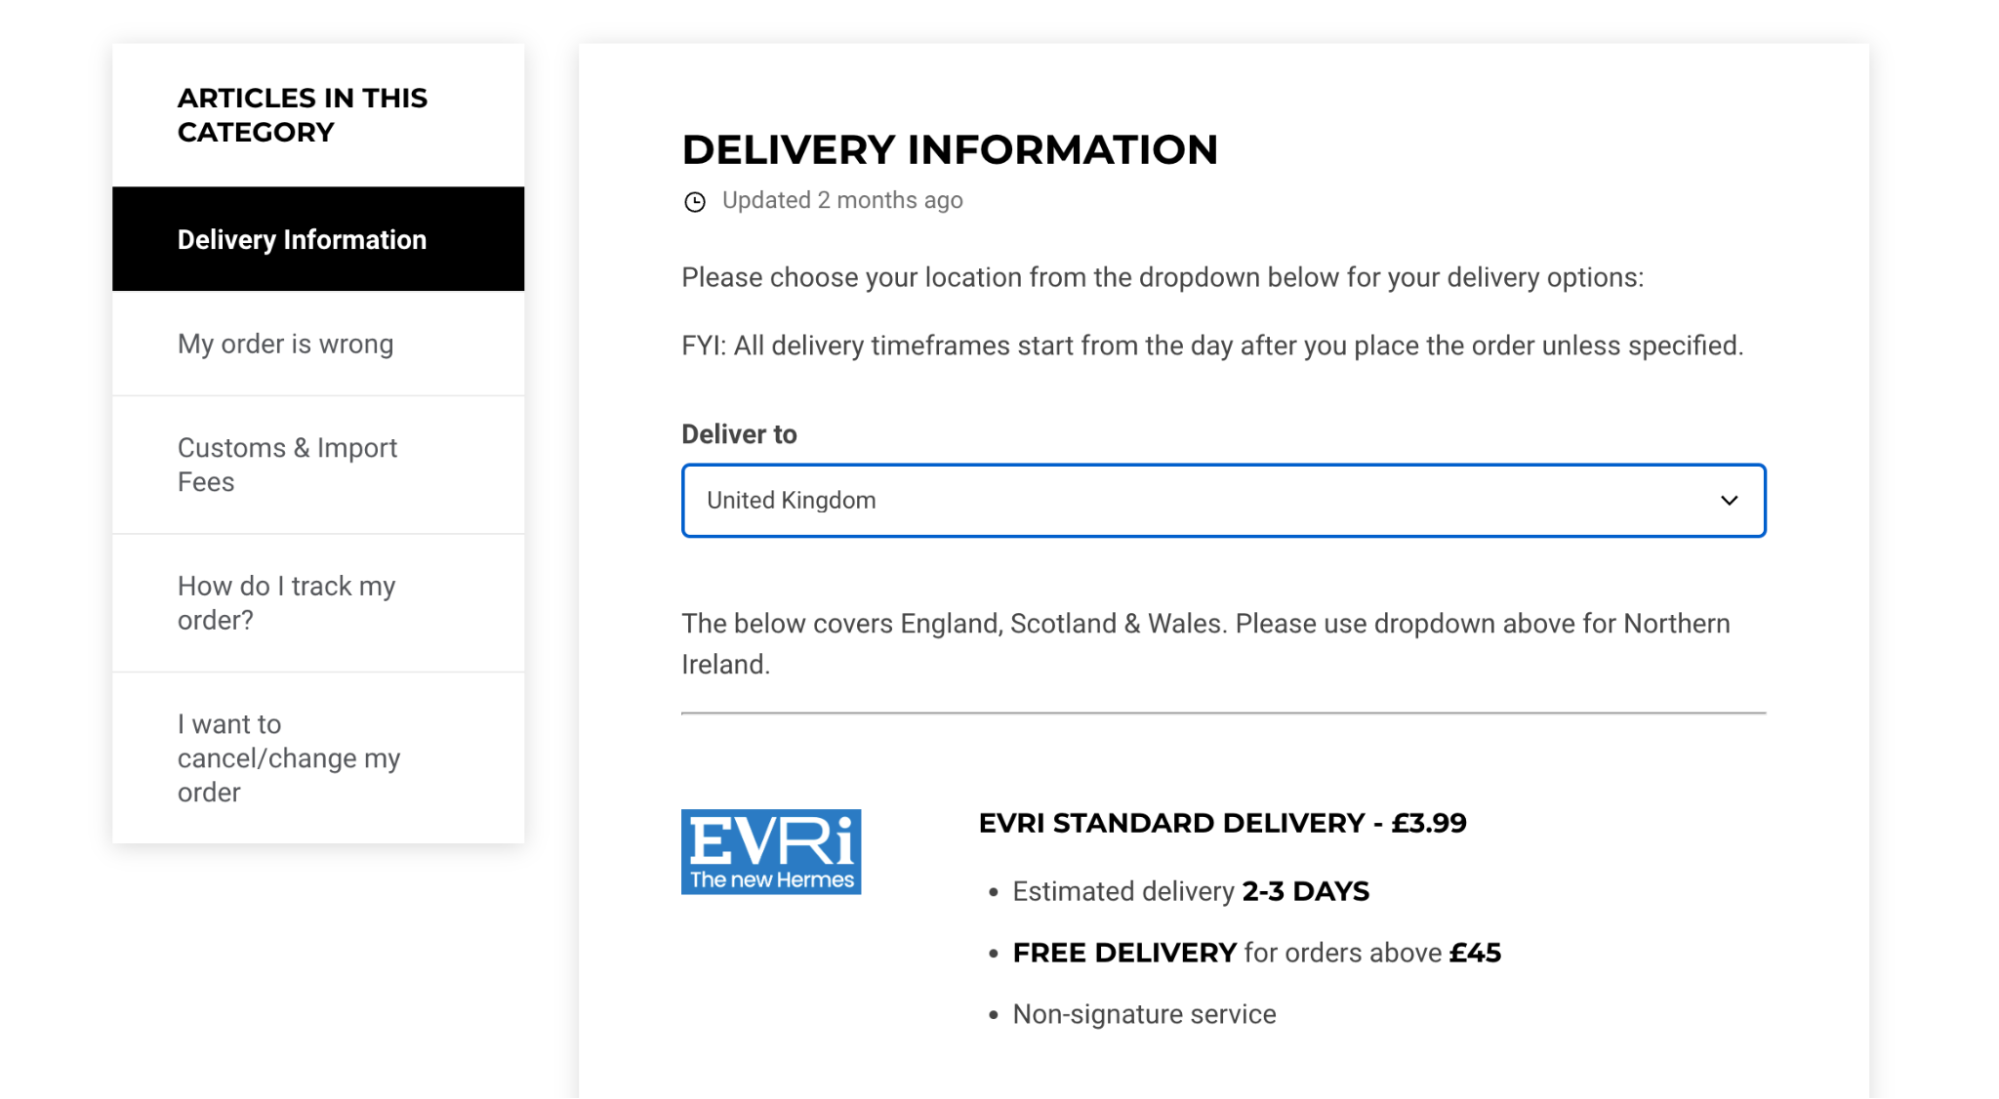 Gymshark’s delivery information page showing shipping options for customers in the UK.